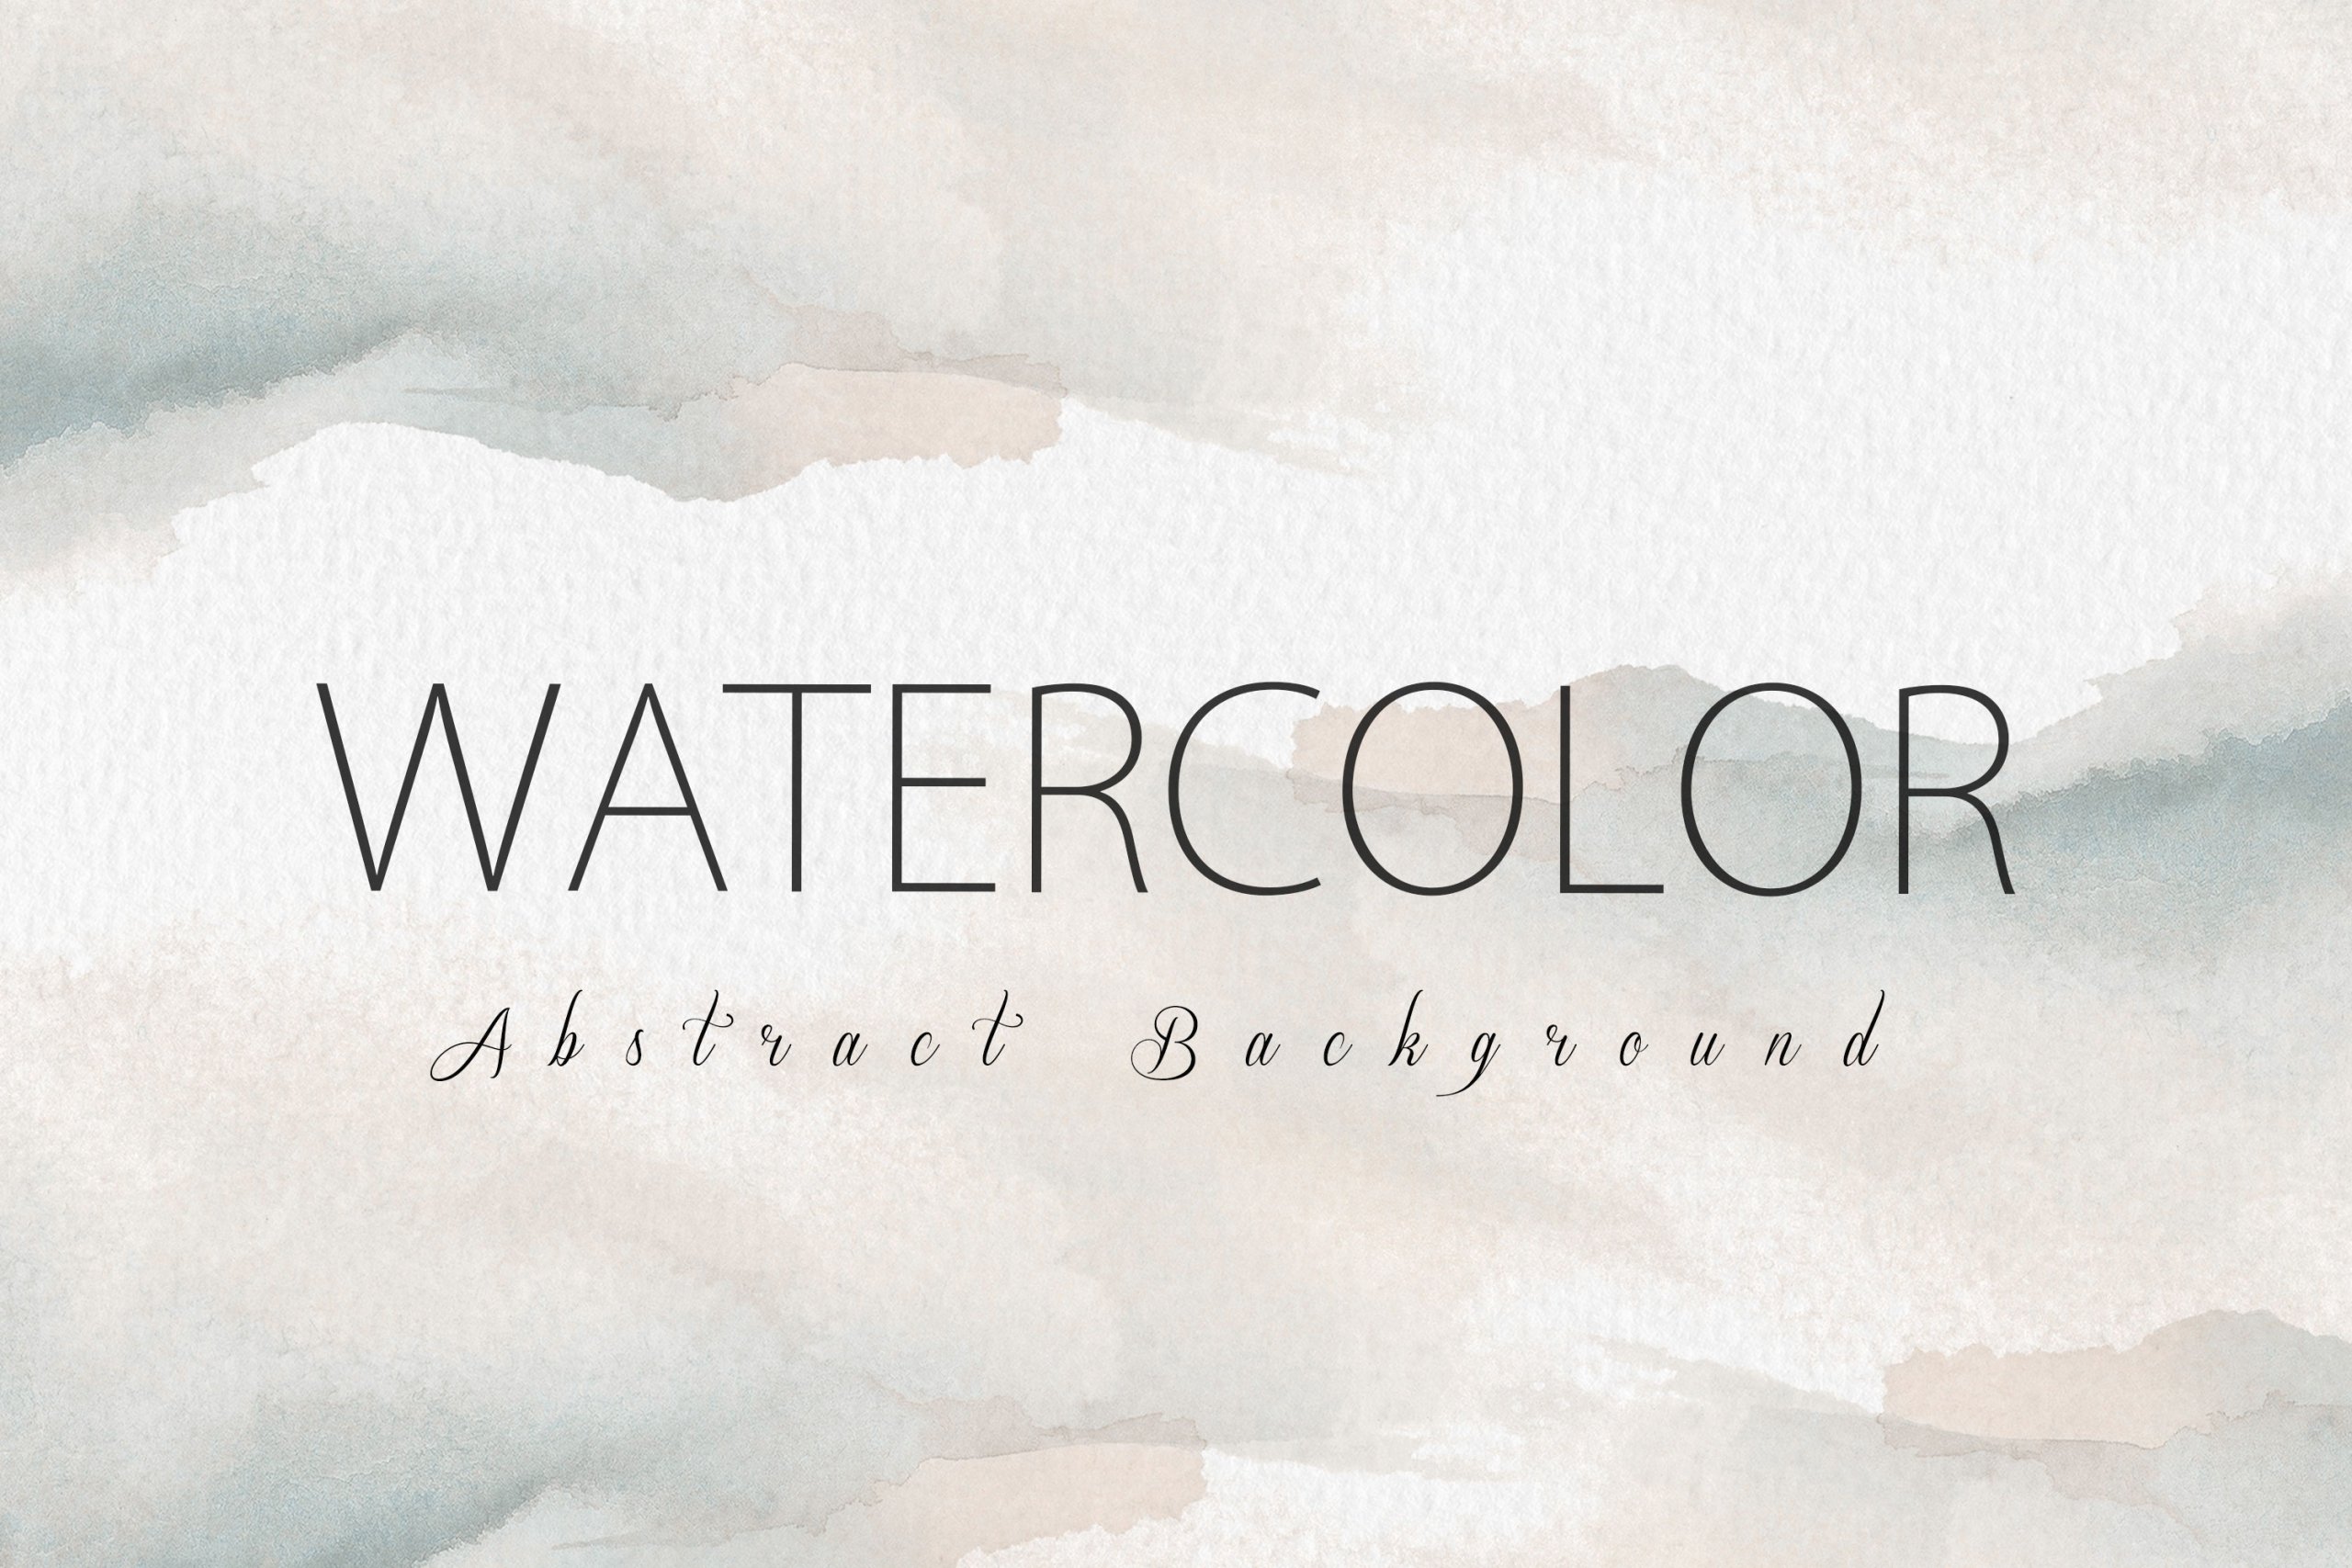 Watercolor Background 1